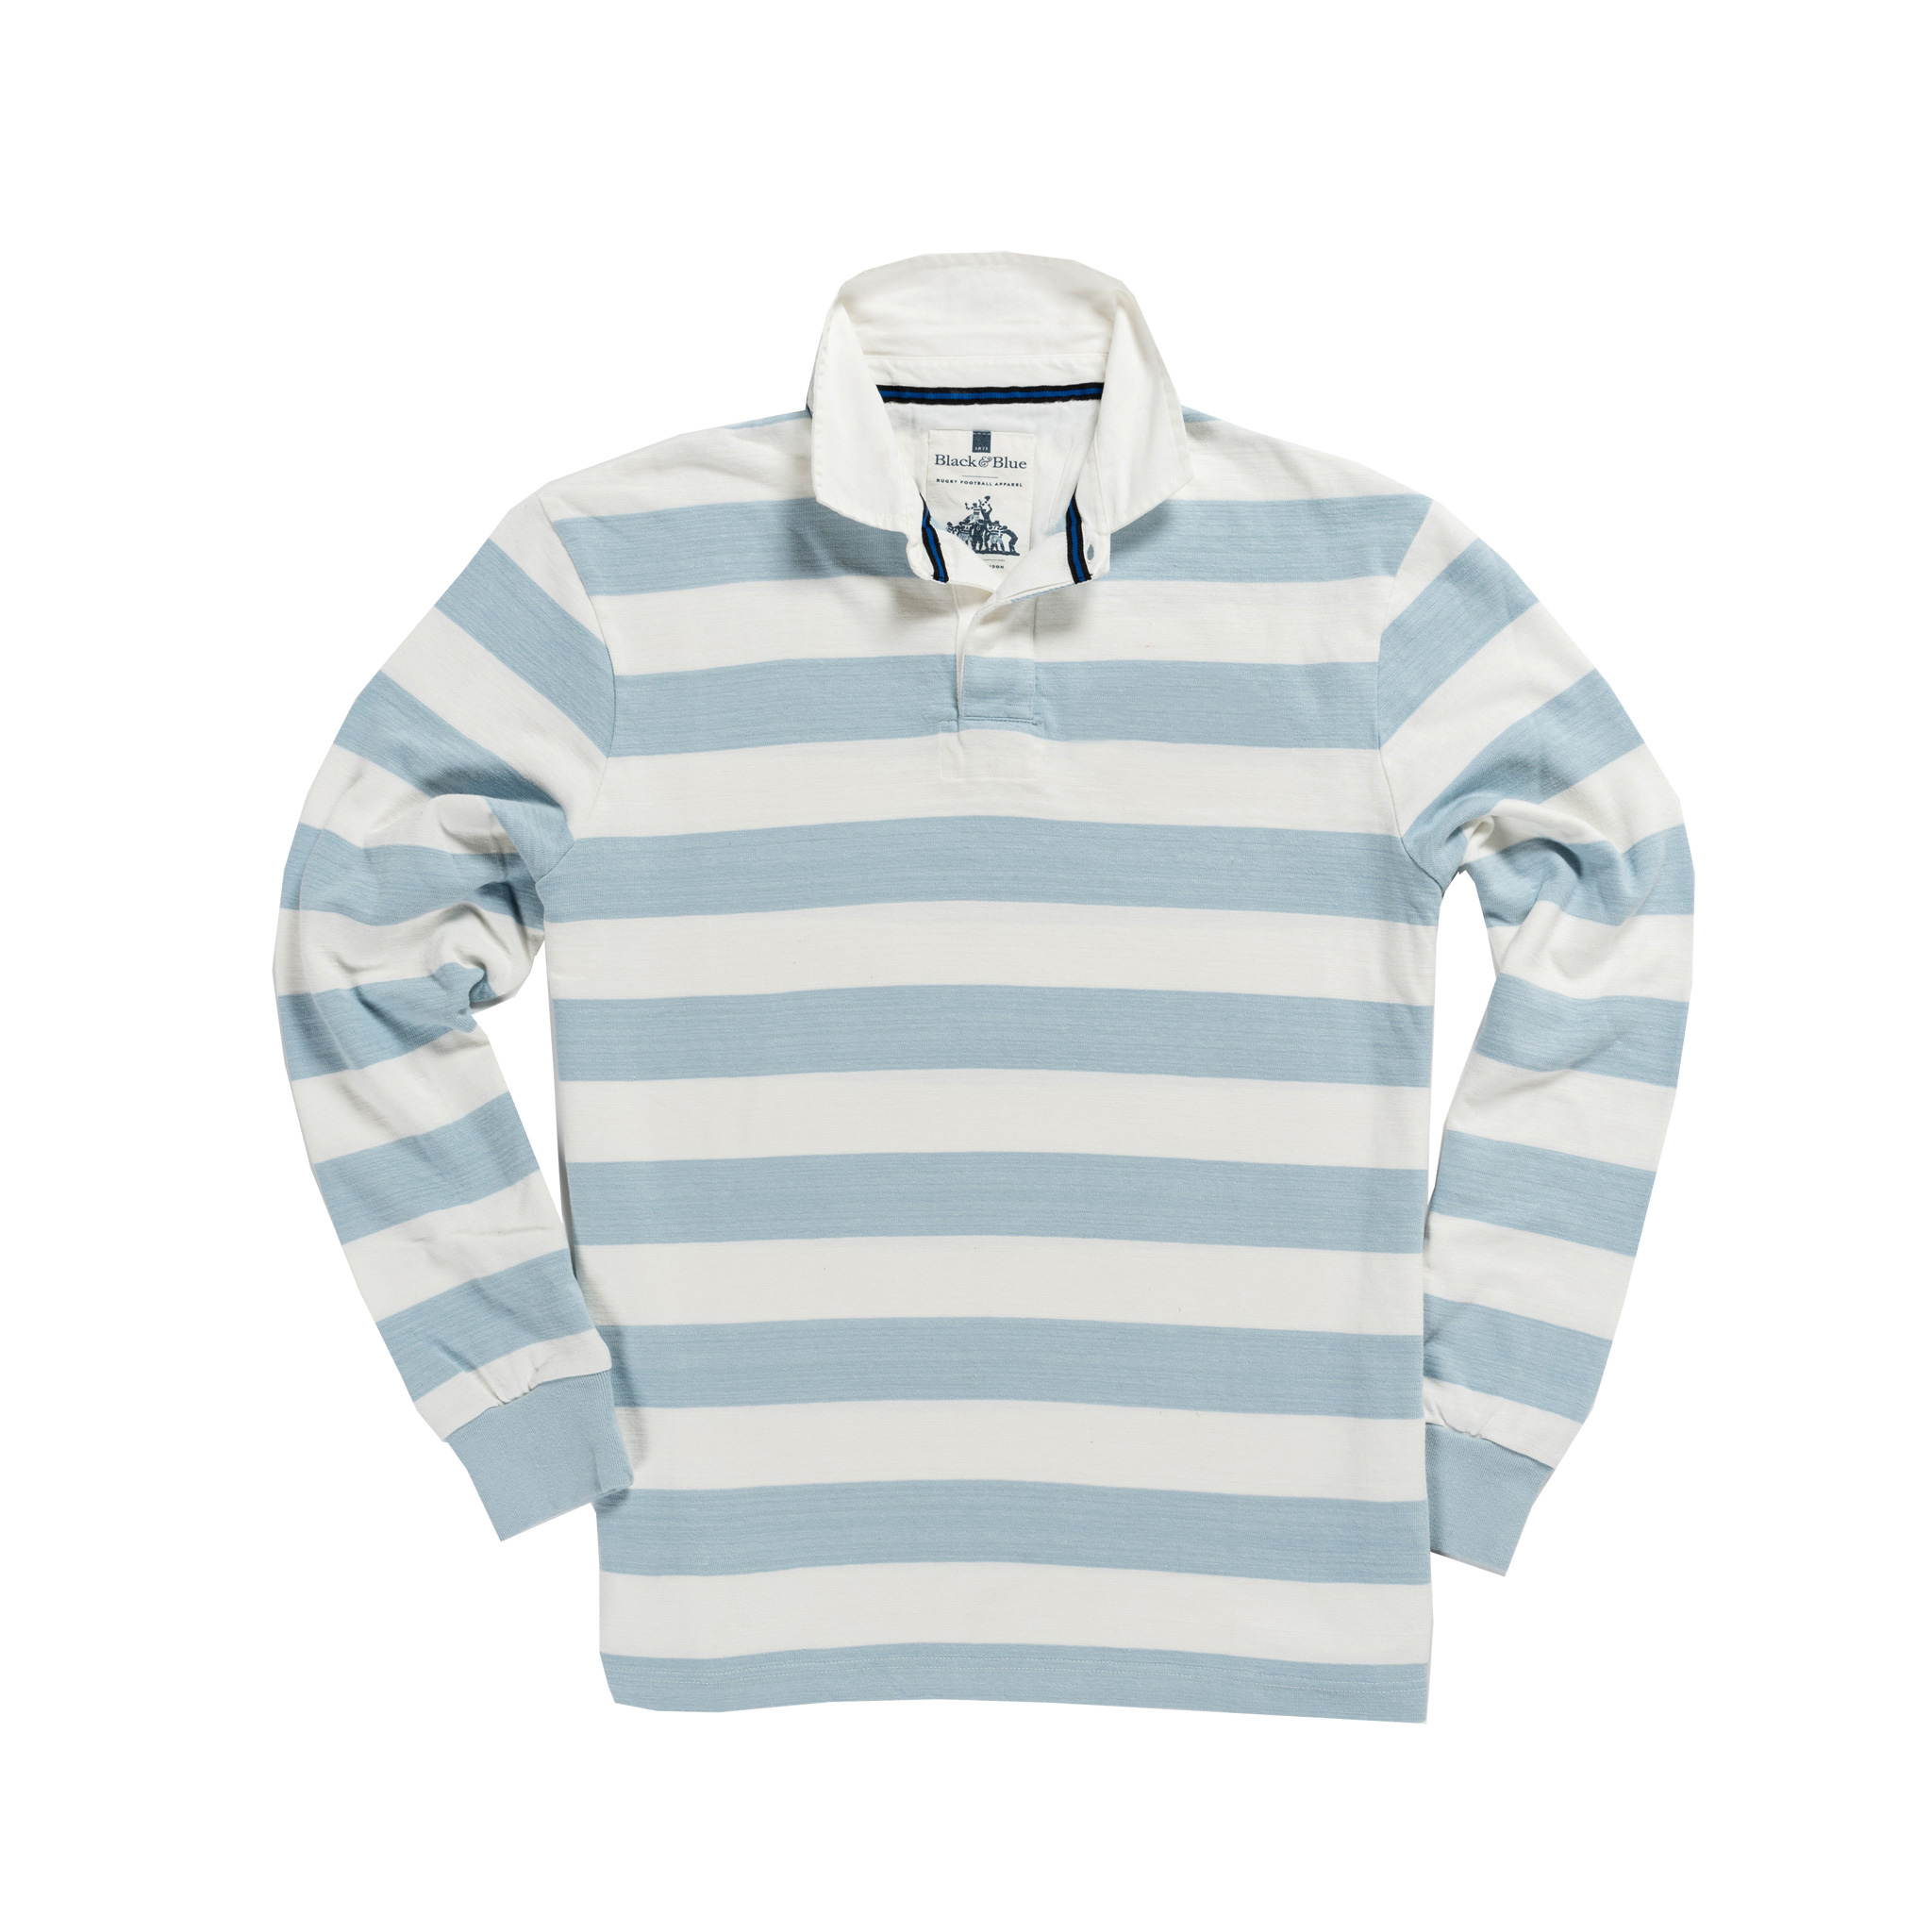 Classic Sky Blue and White 1871 Vintage Rugby Shirt